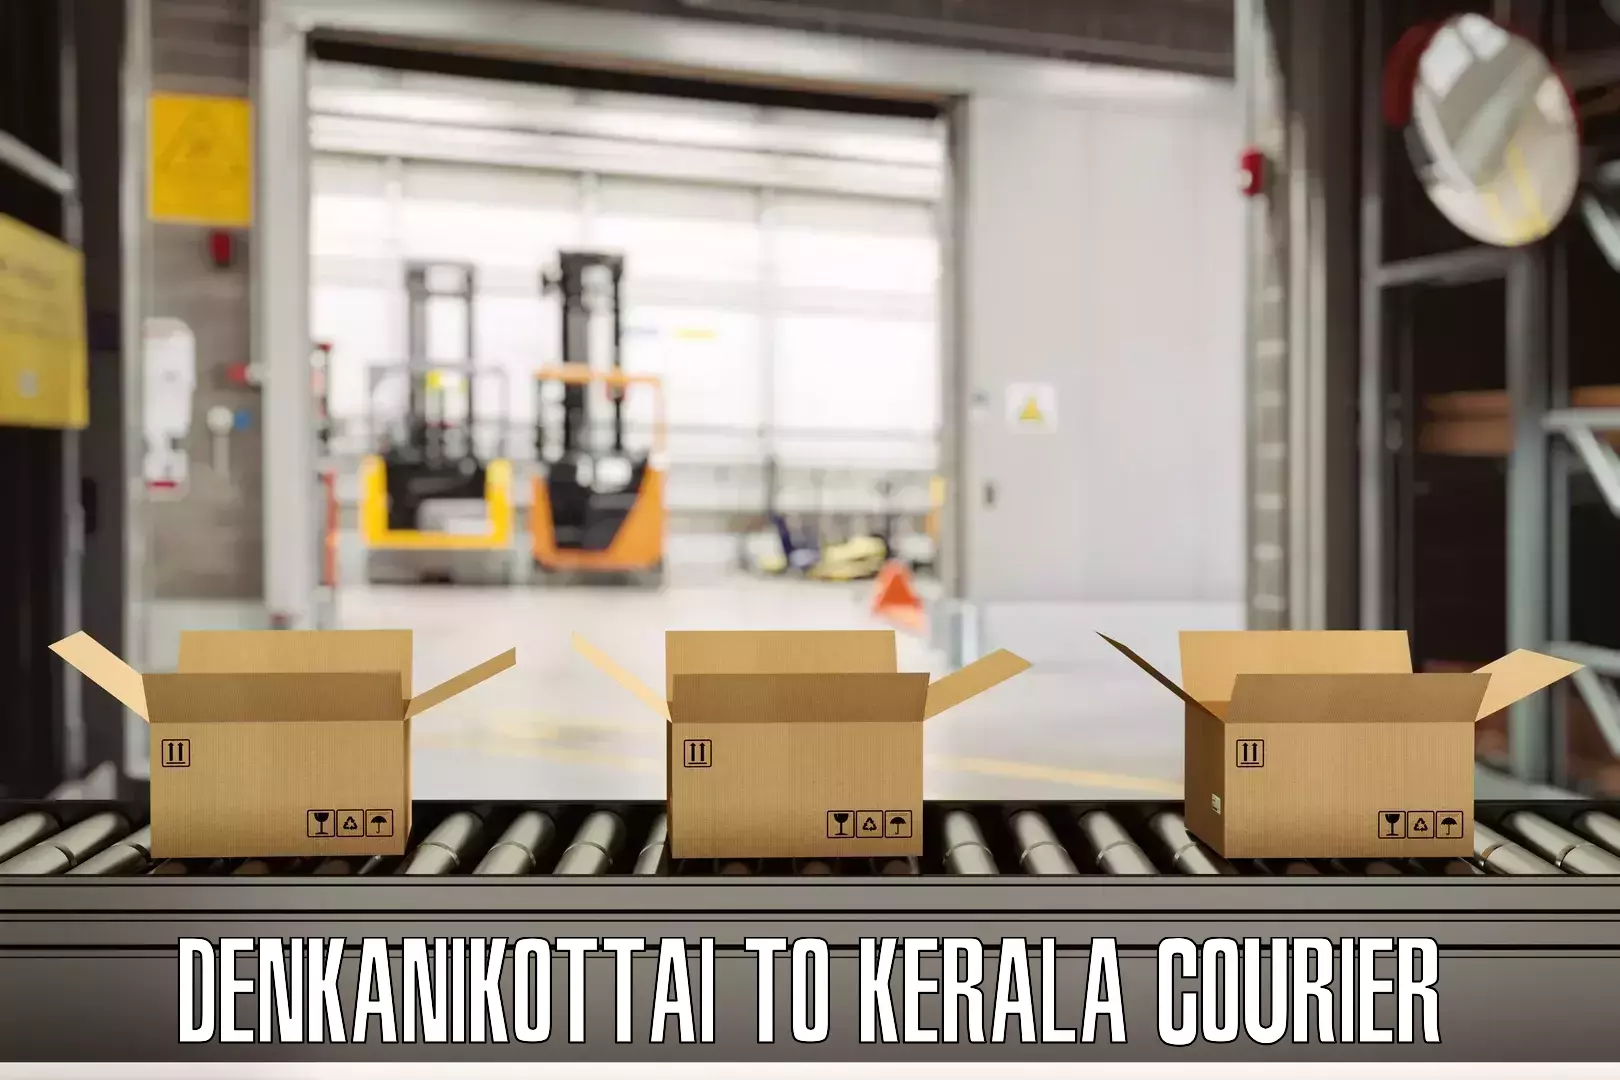 Automated luggage transport Denkanikottai to Cochin University of Science and Technology